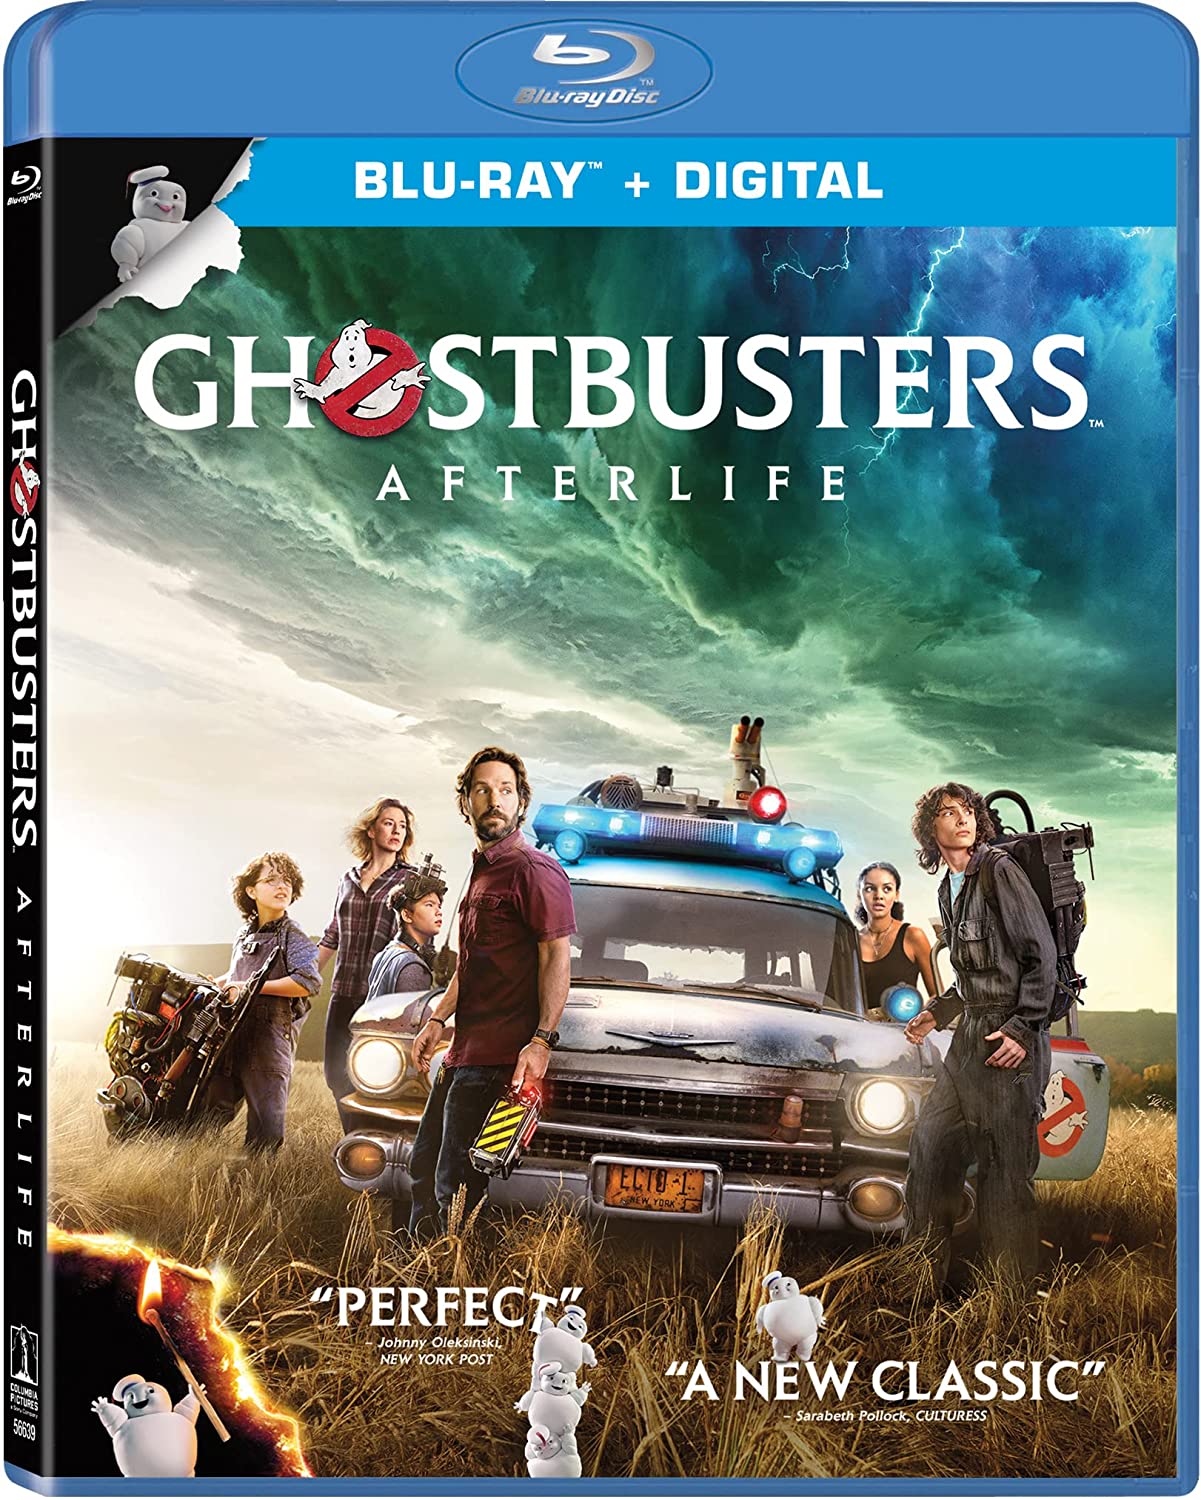 "Ghostbusters: Afterlife" (2021) Blu-ray edition